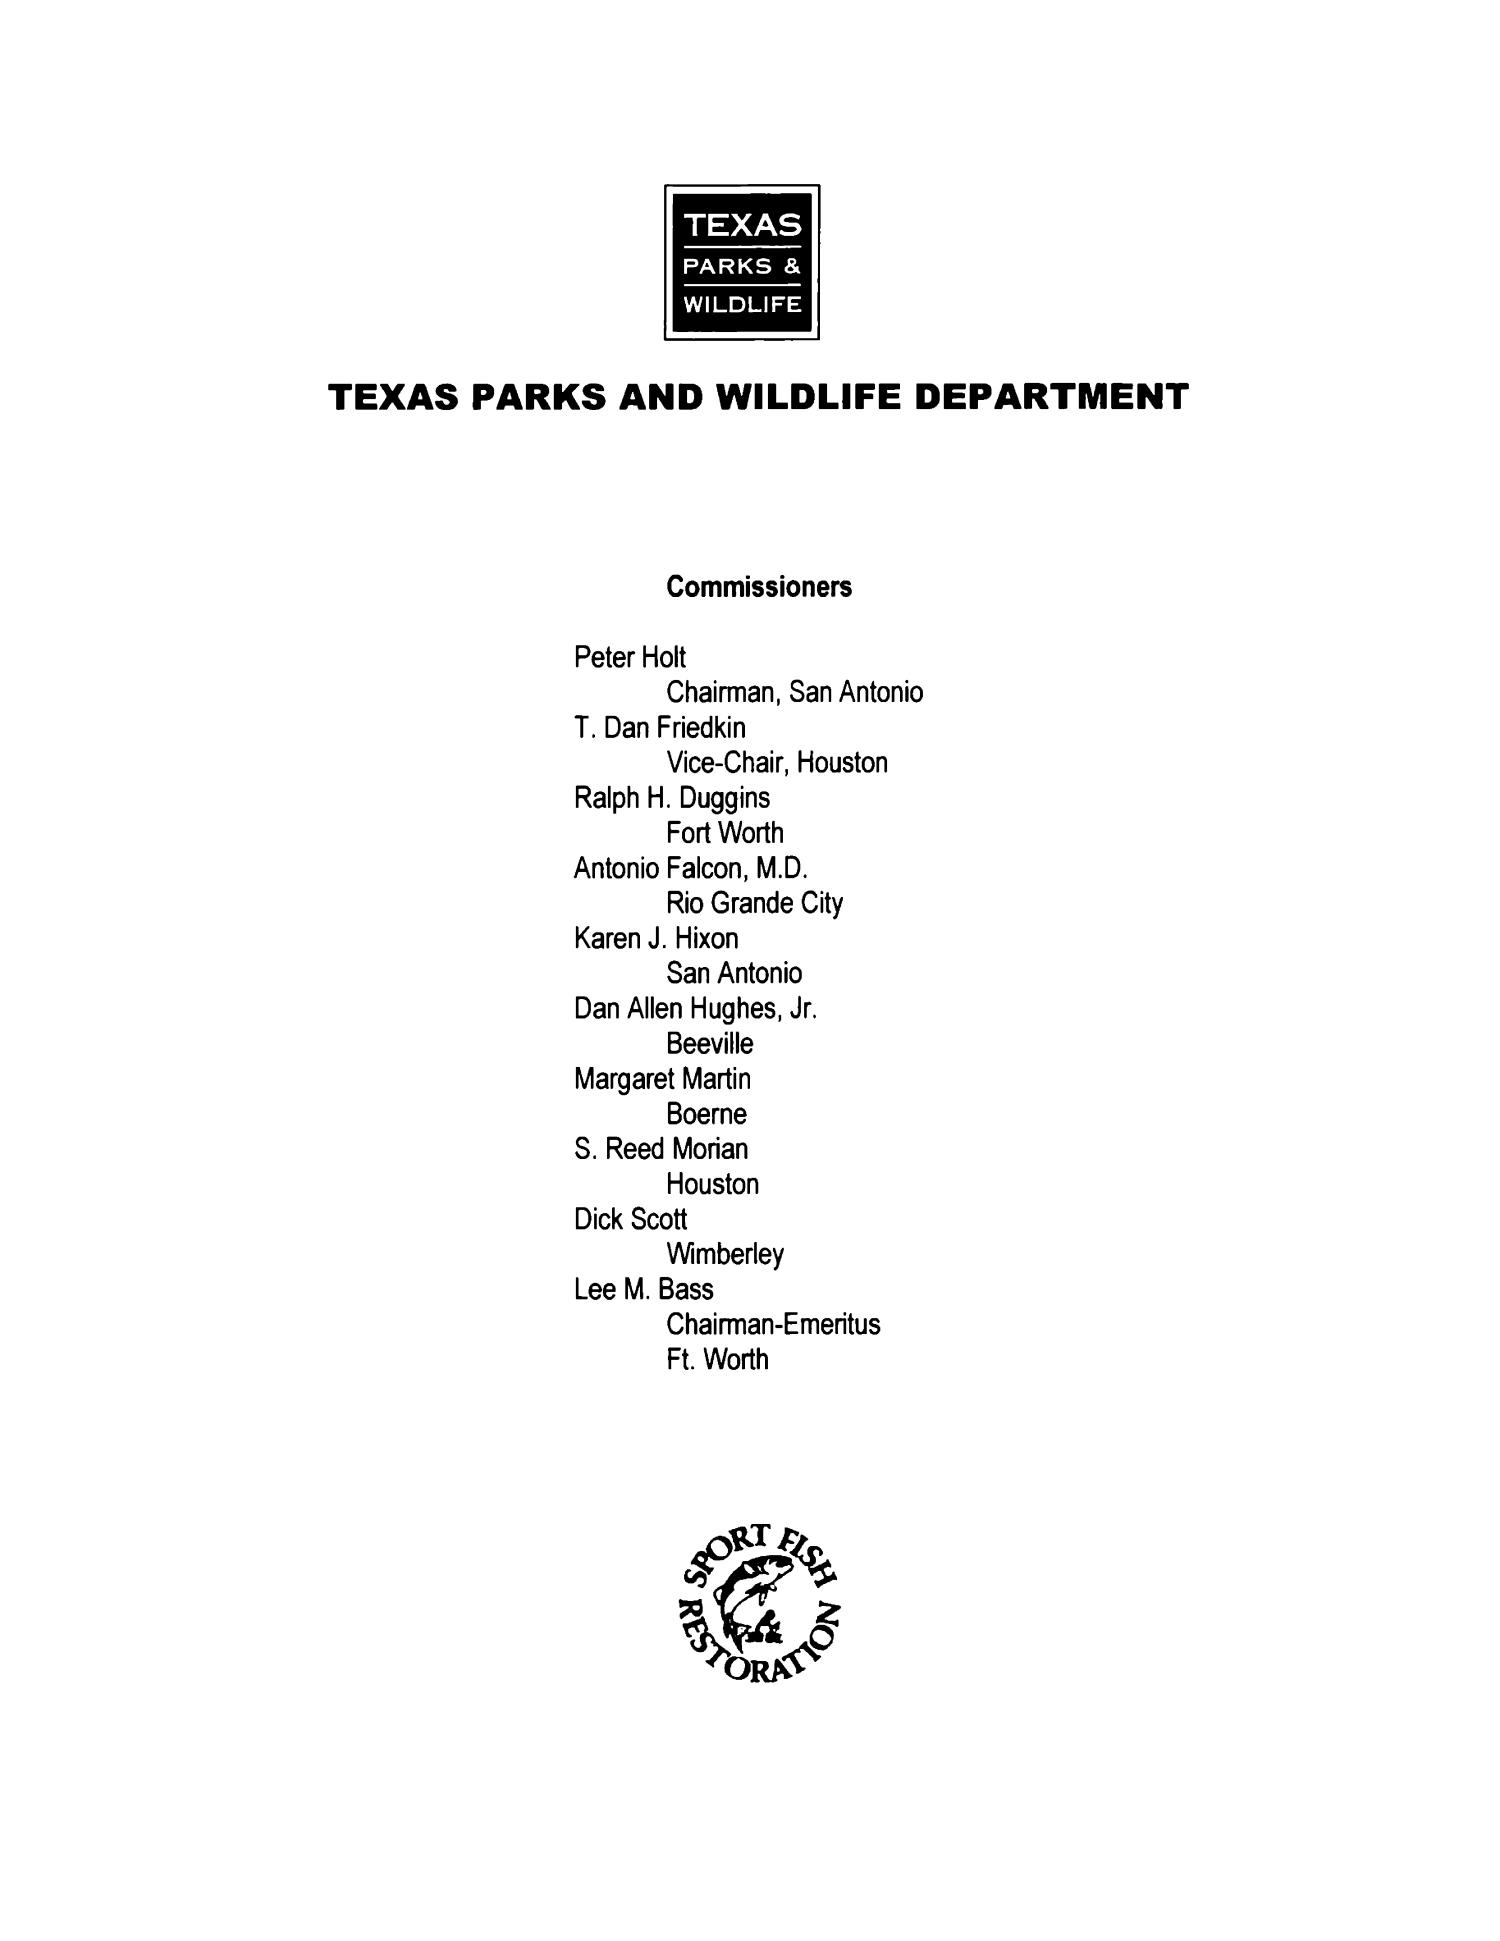 Texas Inland Fisheries Division Annual Report: 2011
                                                
                                                    None
                                                